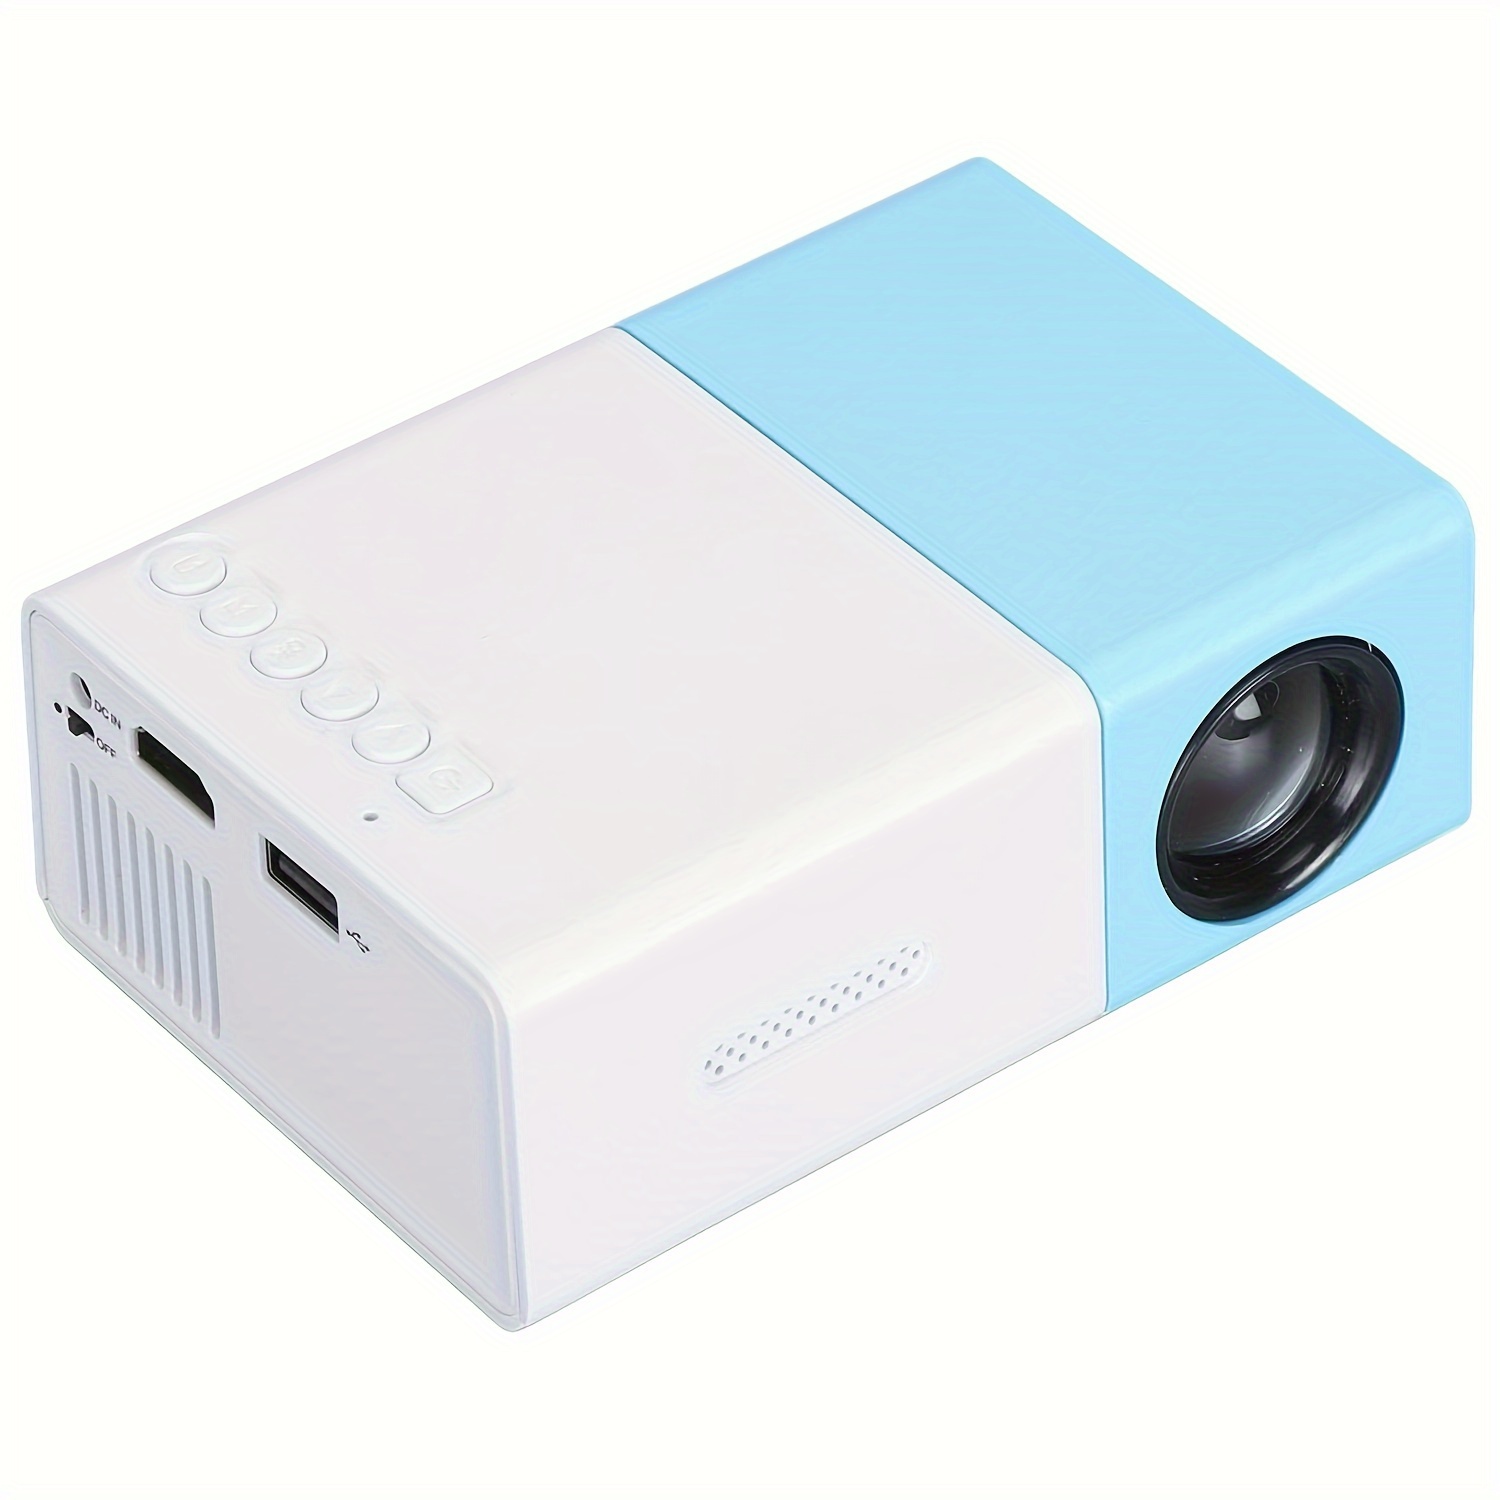 

Mini Hd 1080p Projector, Usb Power Outdoor Home Theater Projector, Compatible With Phone, Laptops, Tablet, Tv Stick, Provide , Usb, Earphone, Av Port And Remote Controller